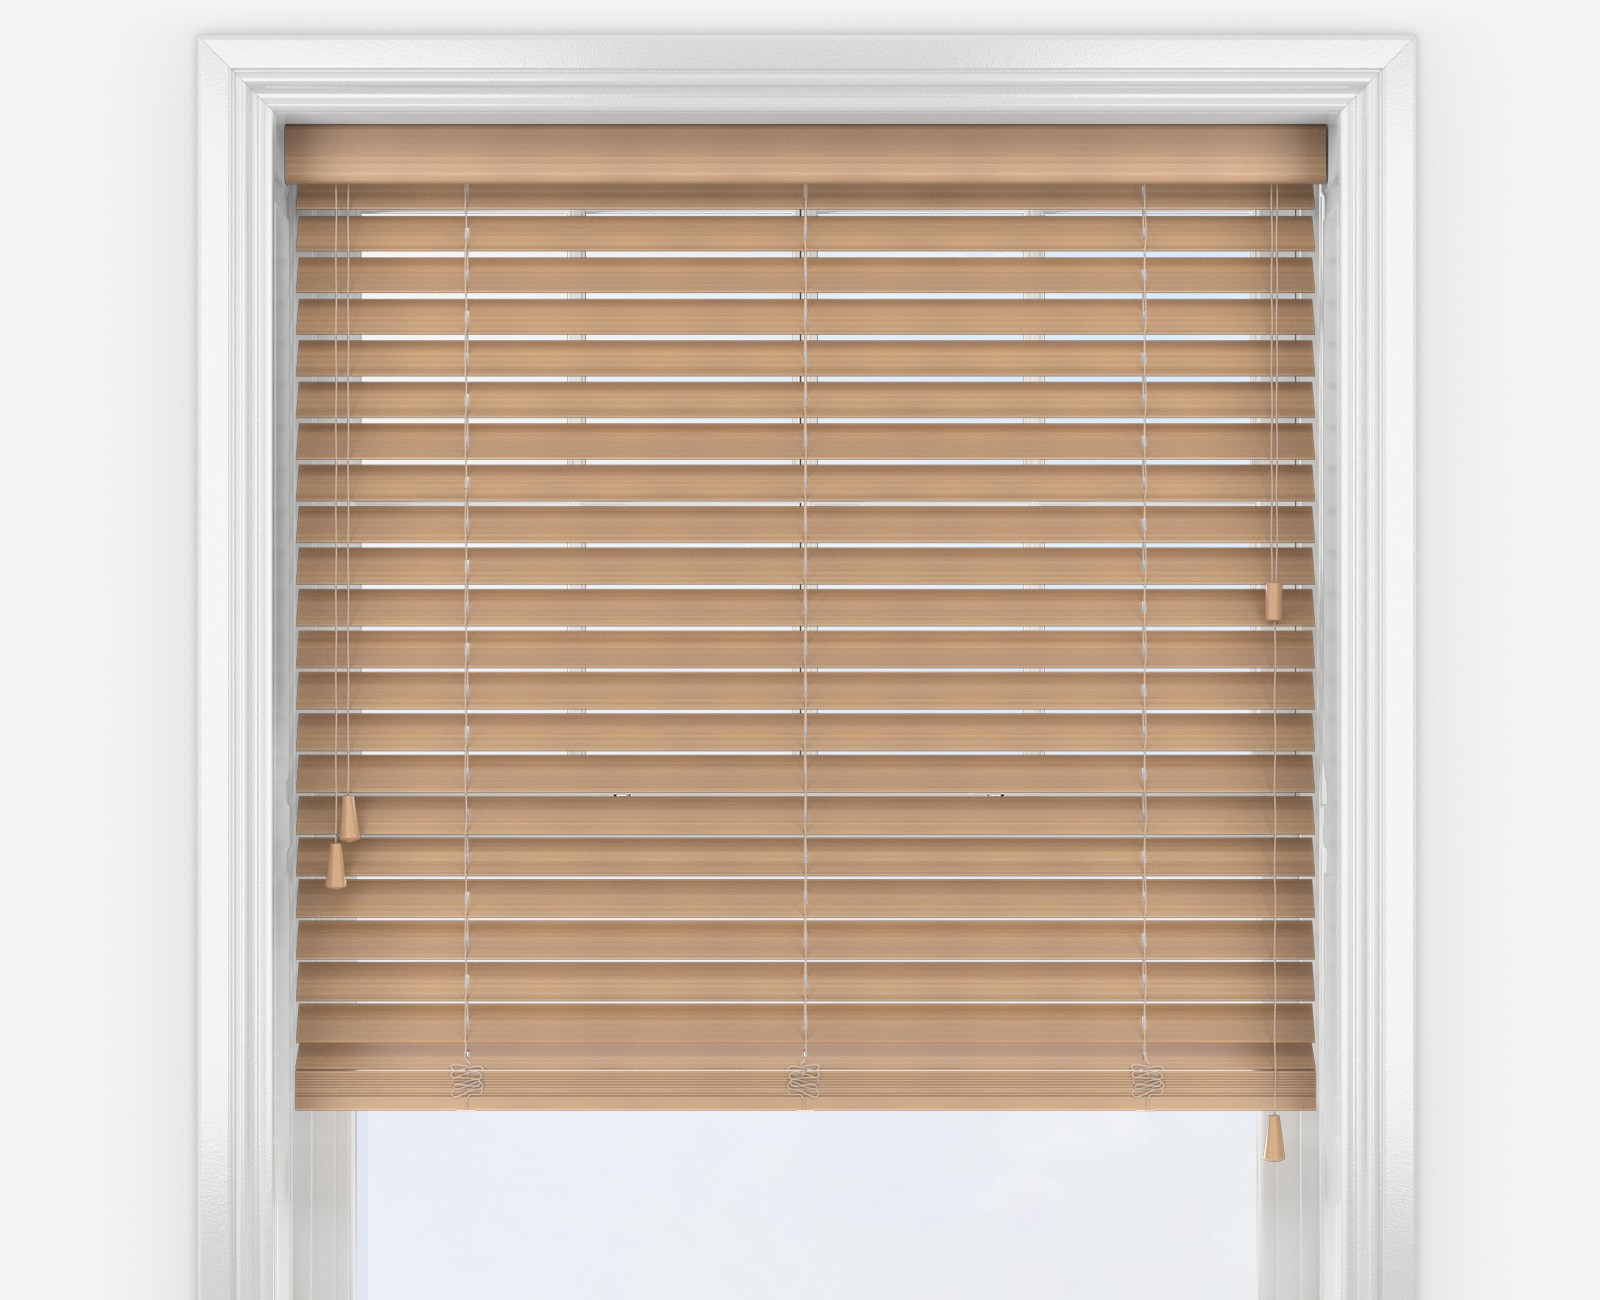 How To Fix Wooden Blinds That Won’t Open